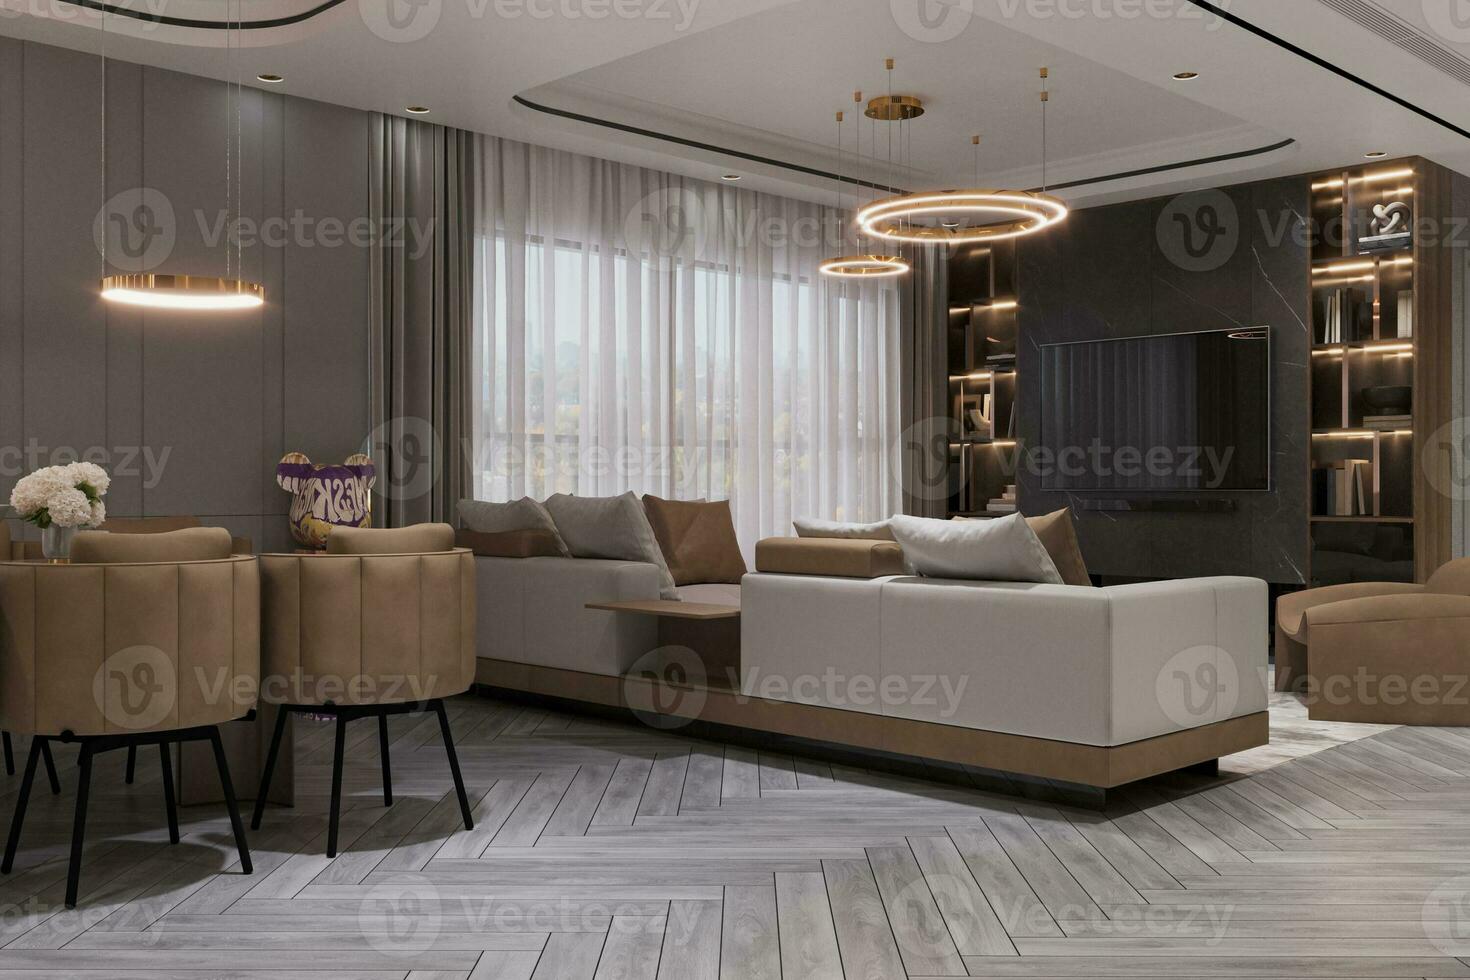 Living room and  dining room attached functionality for a home decor elements interior design sets 3D rendering photo